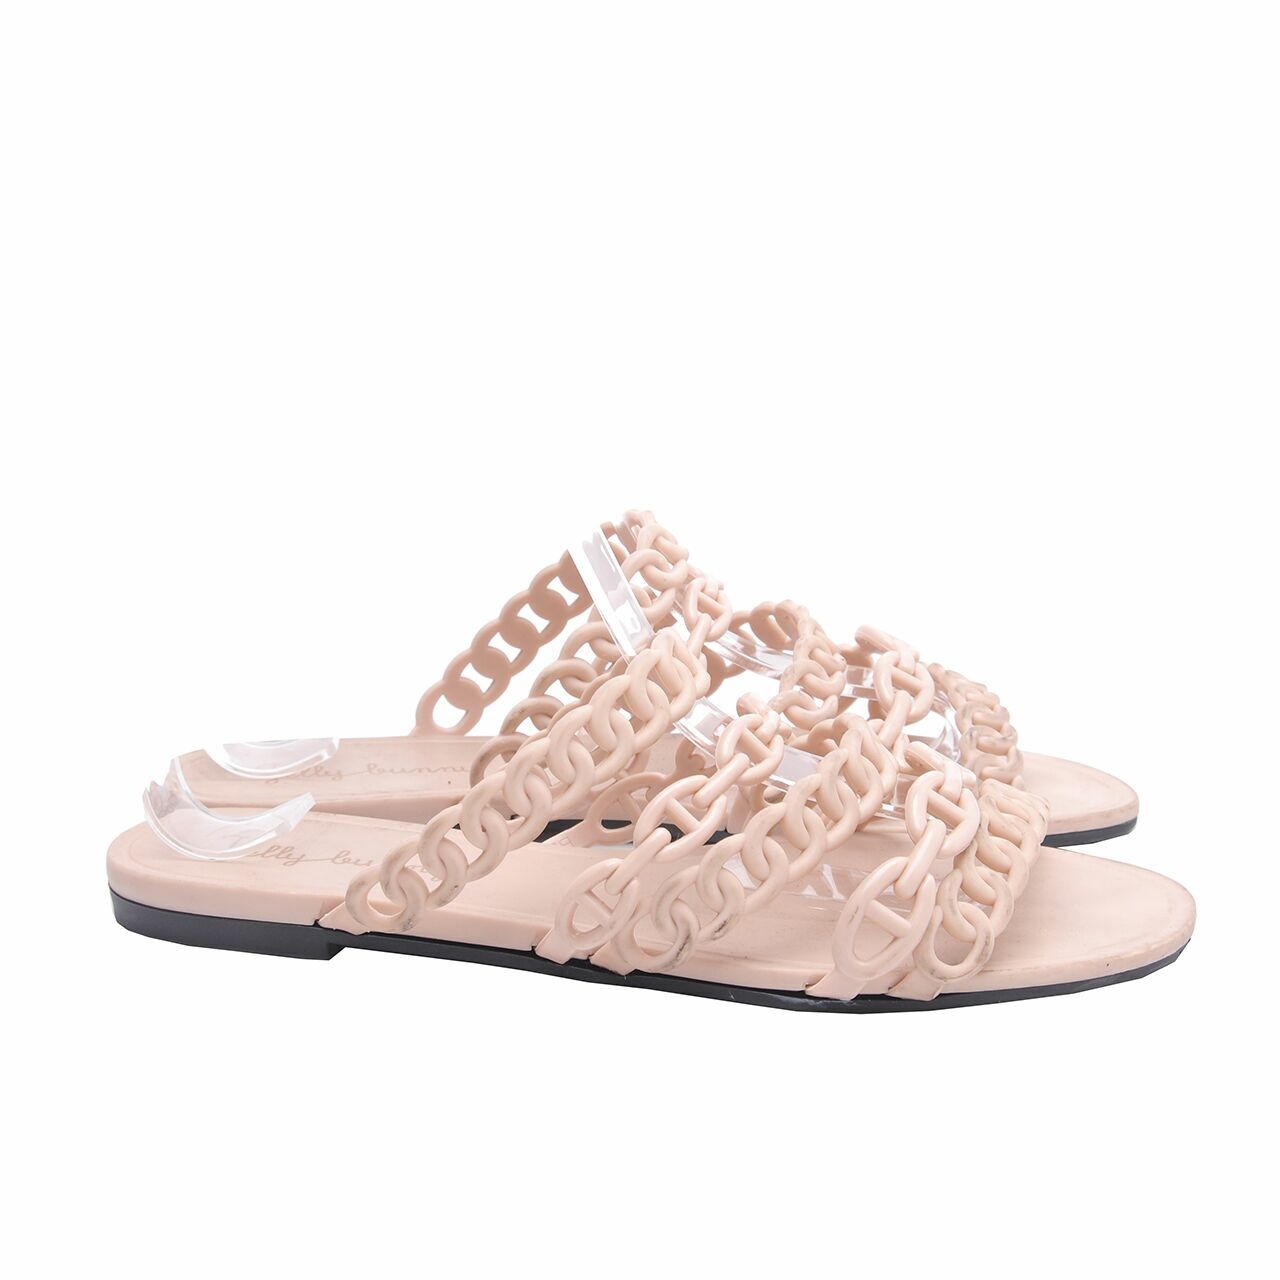 Jelly Bunny Dusty Pink Sandals